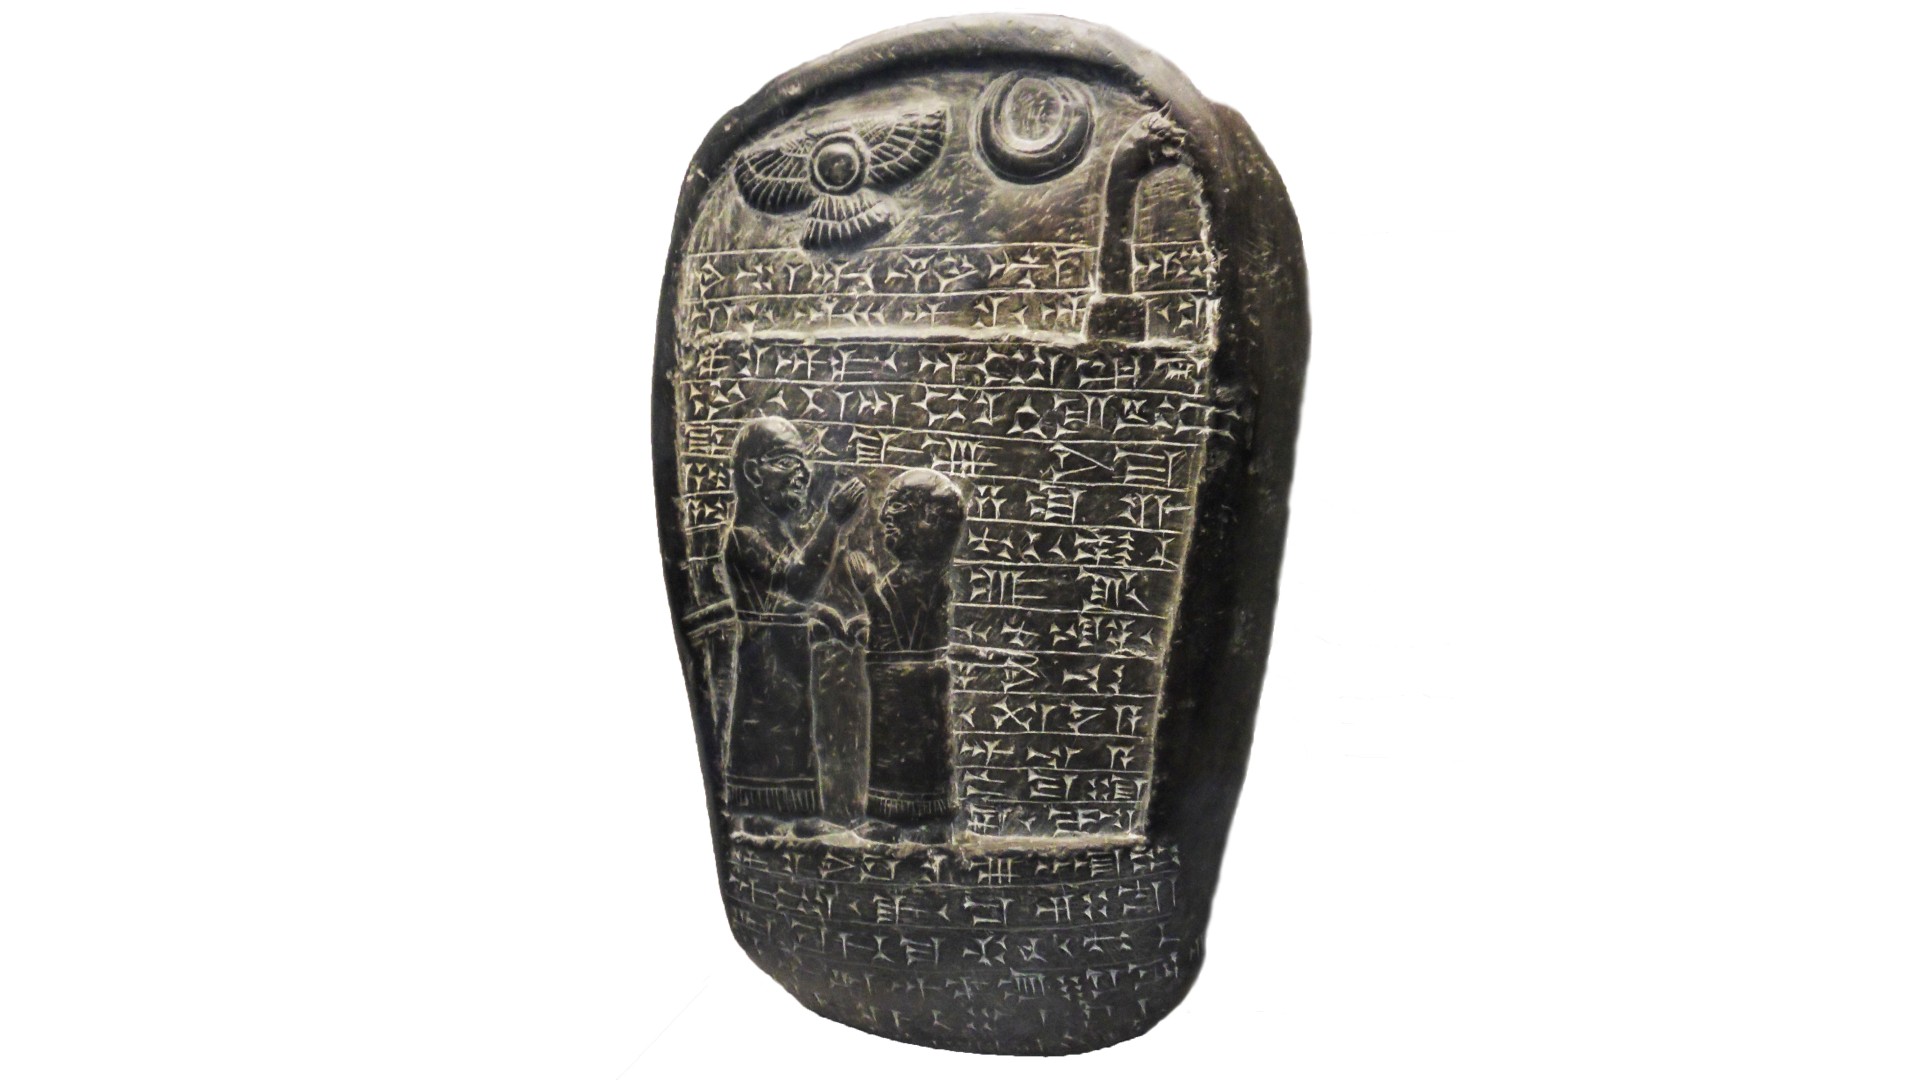 Boundary Stone to record the services of Chariot commander Ritti-Marduk, in a campaign against Elam in South Iran from the Reign of Nebuchadnezzar I